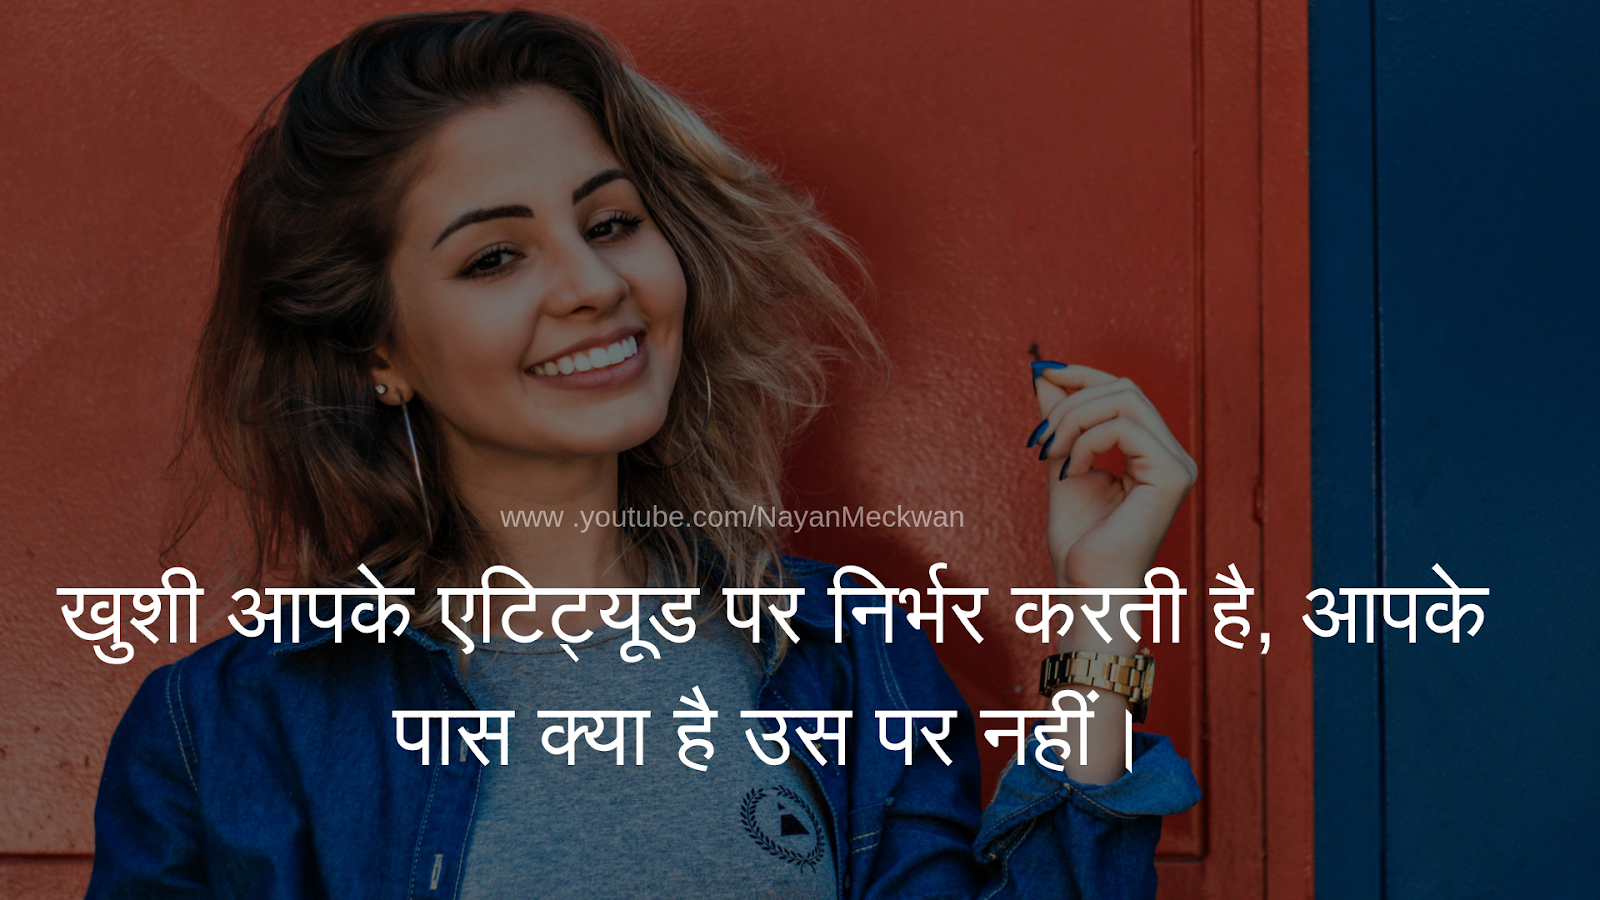 Best Success meaningful motivational Hindi Images | Picture Quote 2018